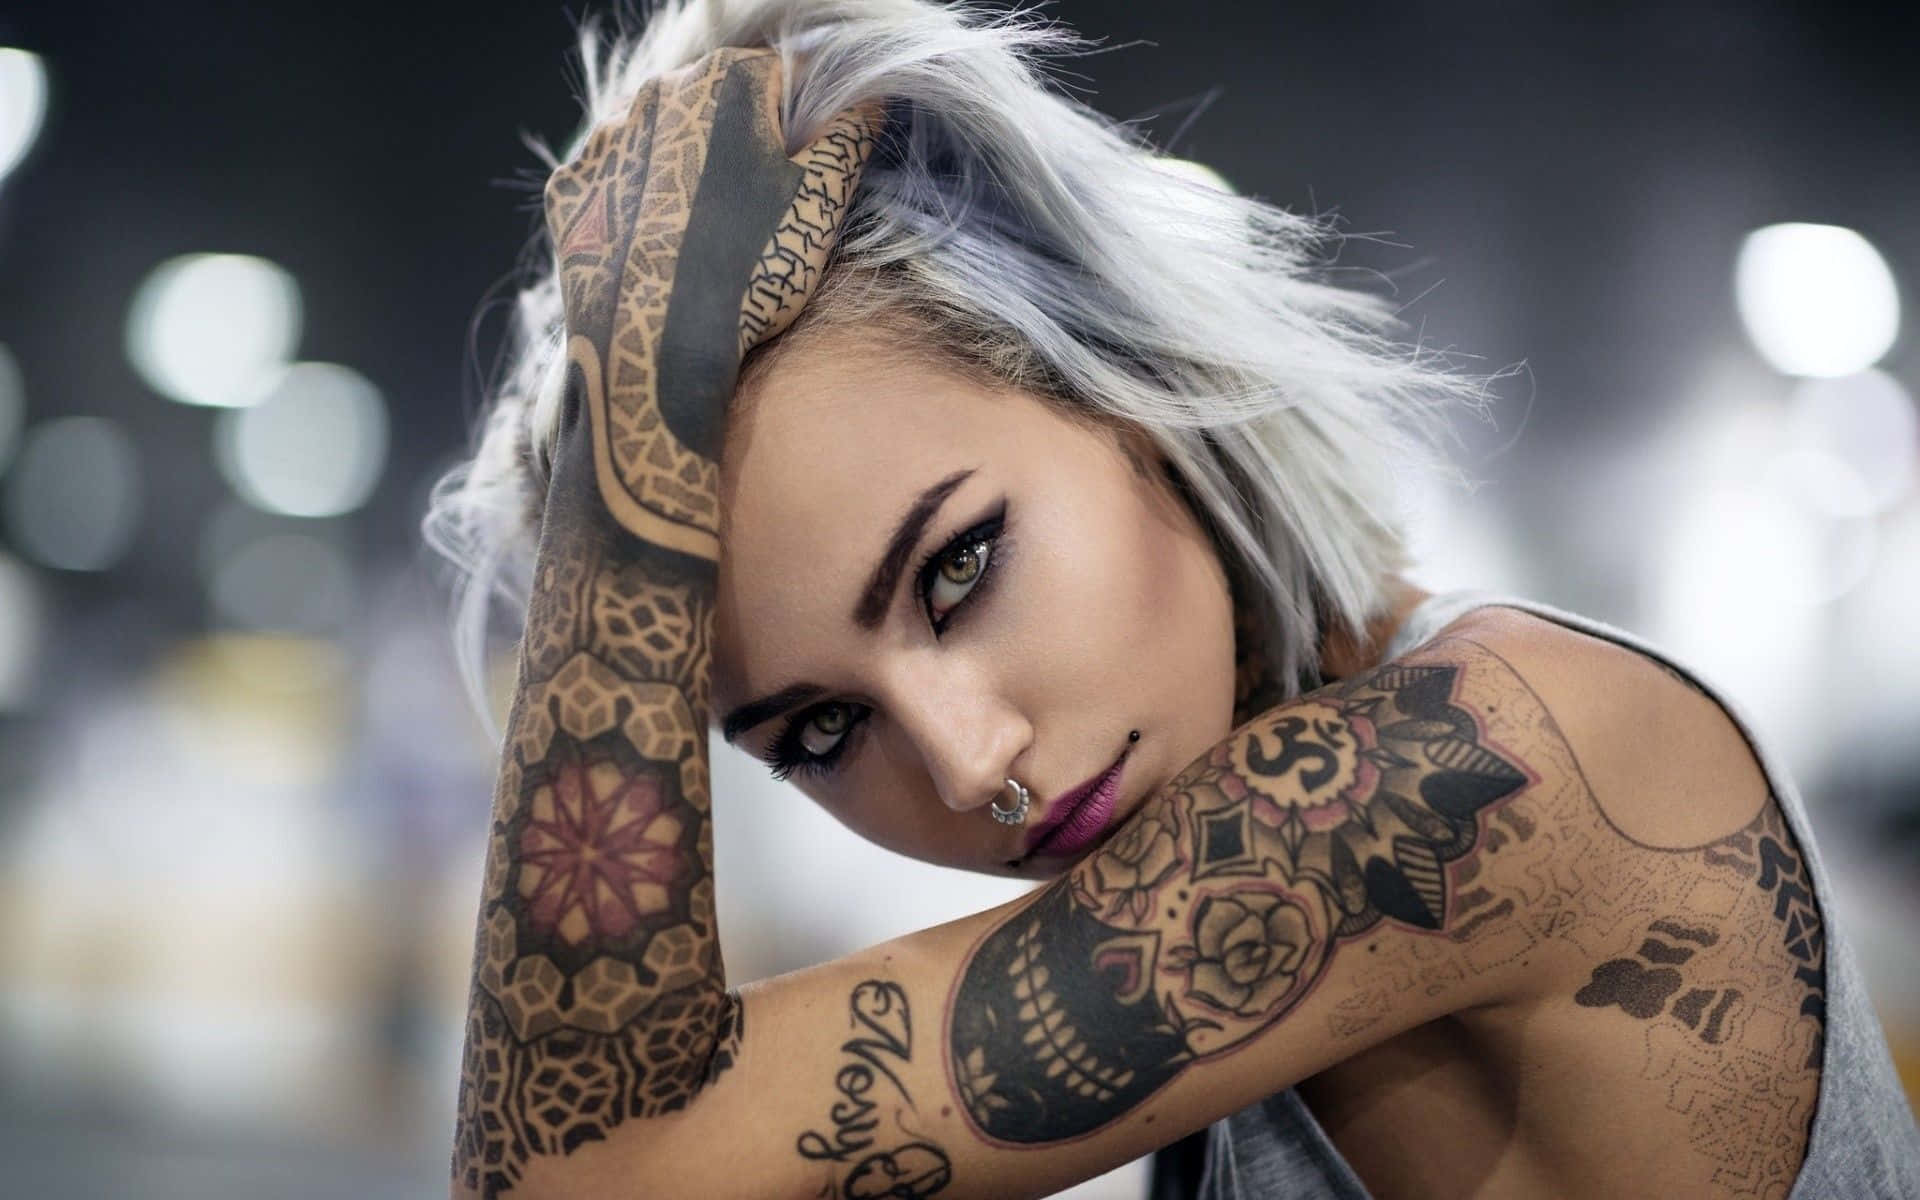 A Woman With Tattoos On Her Arm